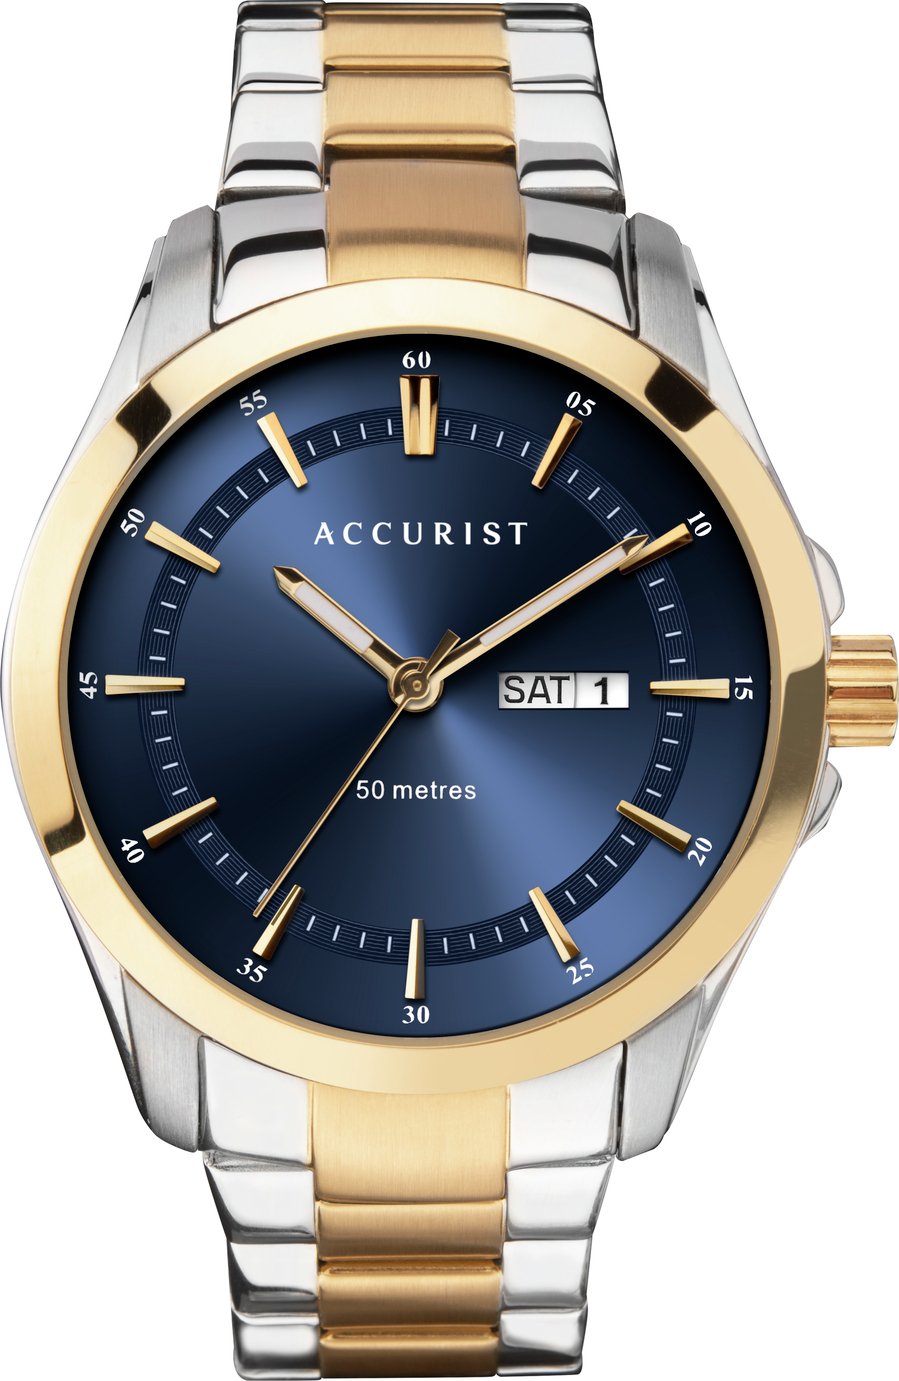 Accurist Men's Two Tone Stainless Steel Bracelet Watch Review